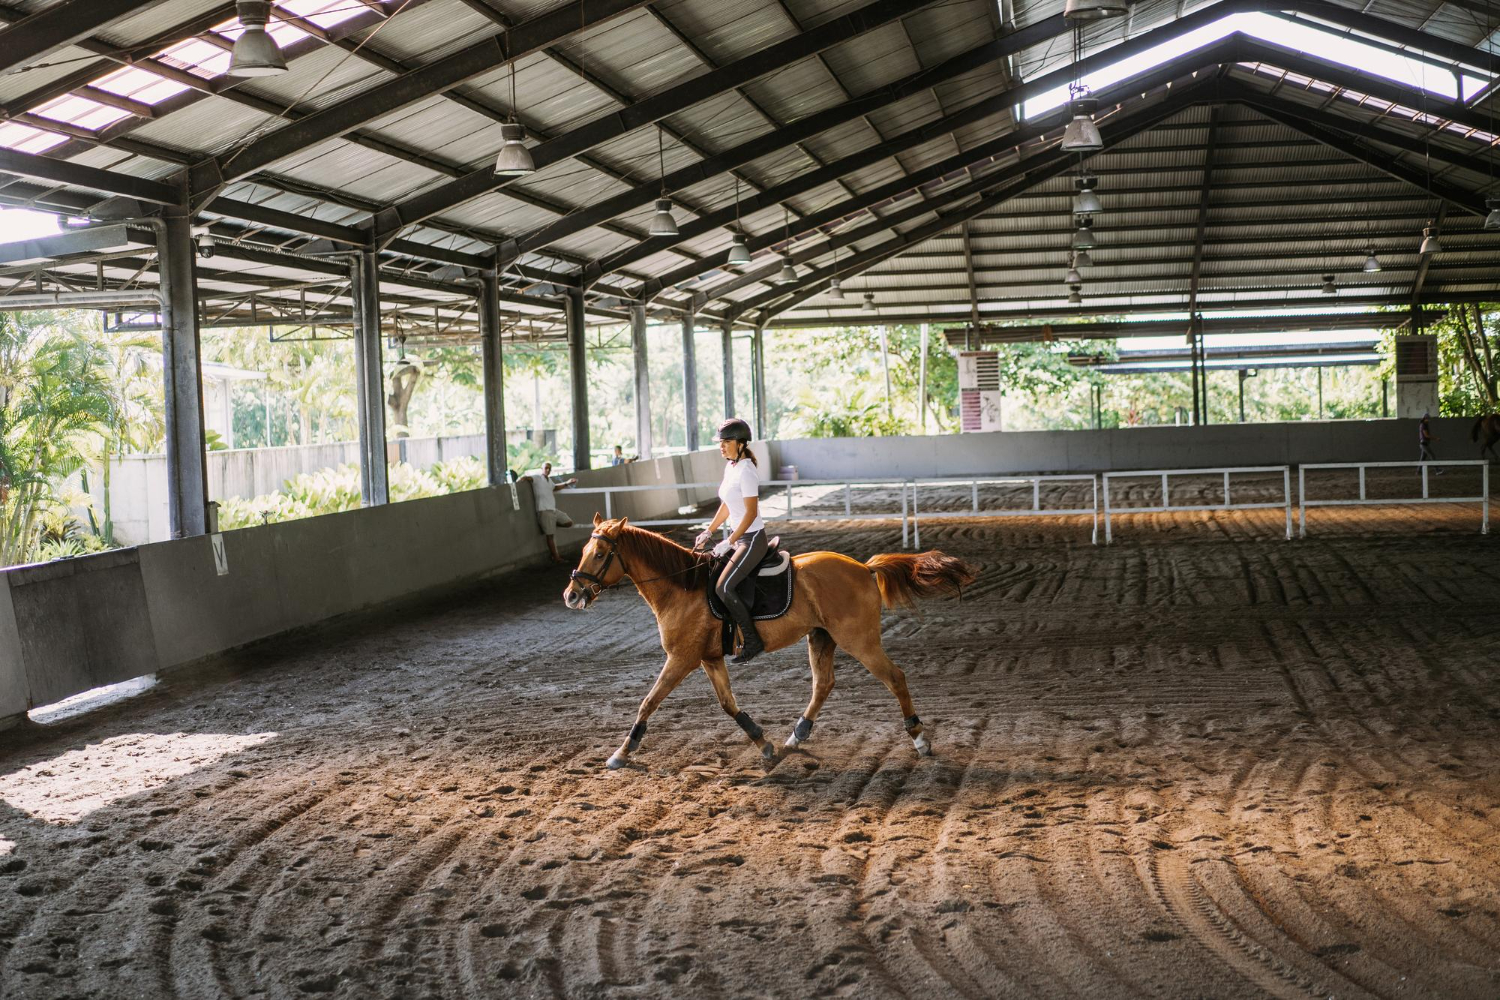 A girl riding on horse in indoor riding arena